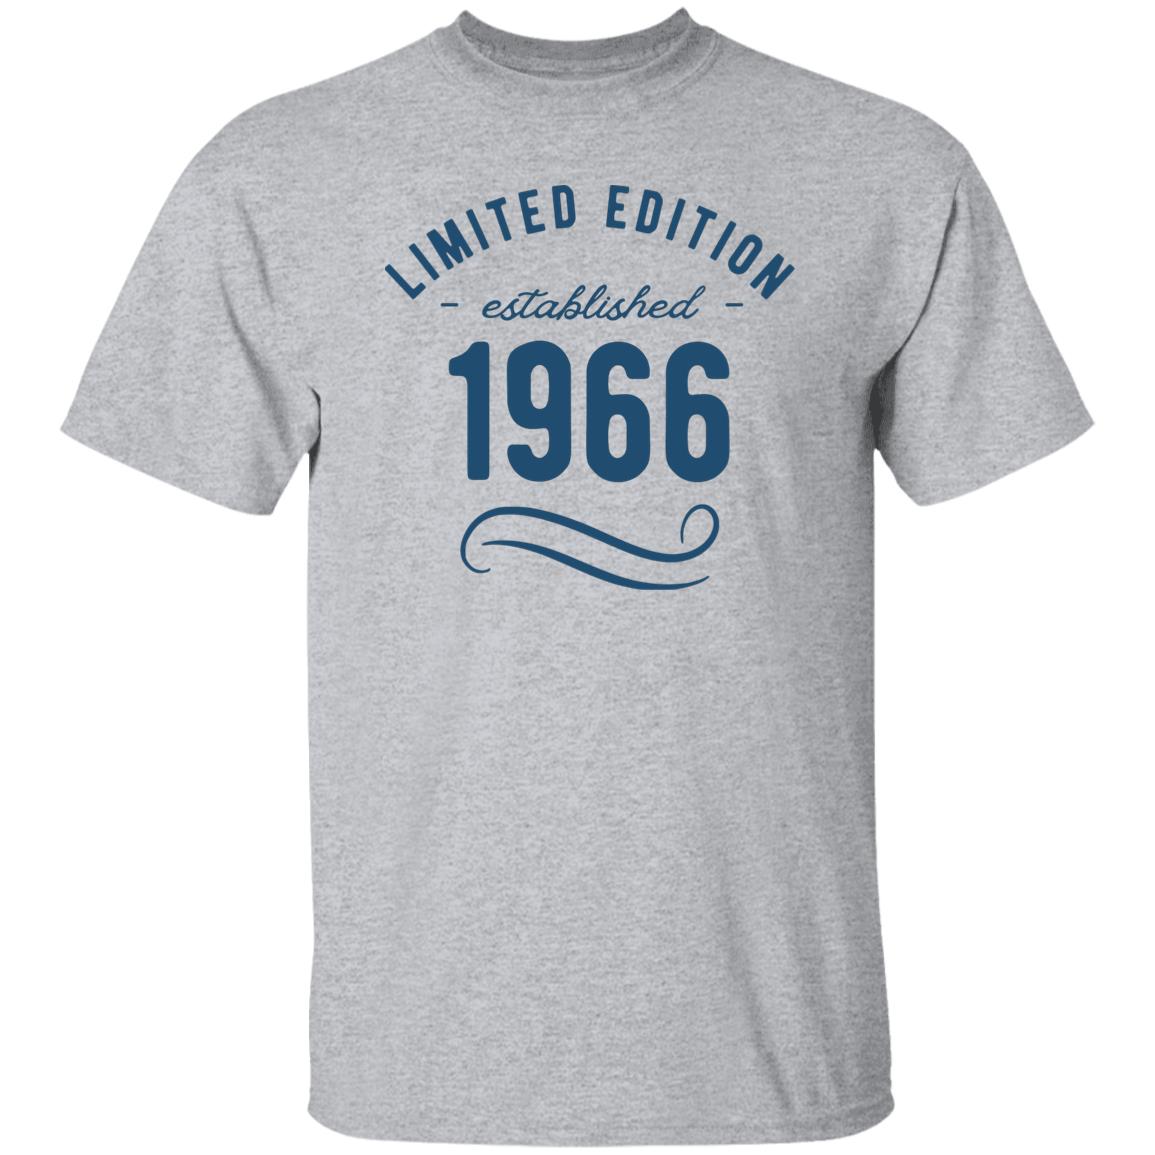 1960s Gray Limited Edition T-Shirt970s Grey Limited Edition T-Shirt 